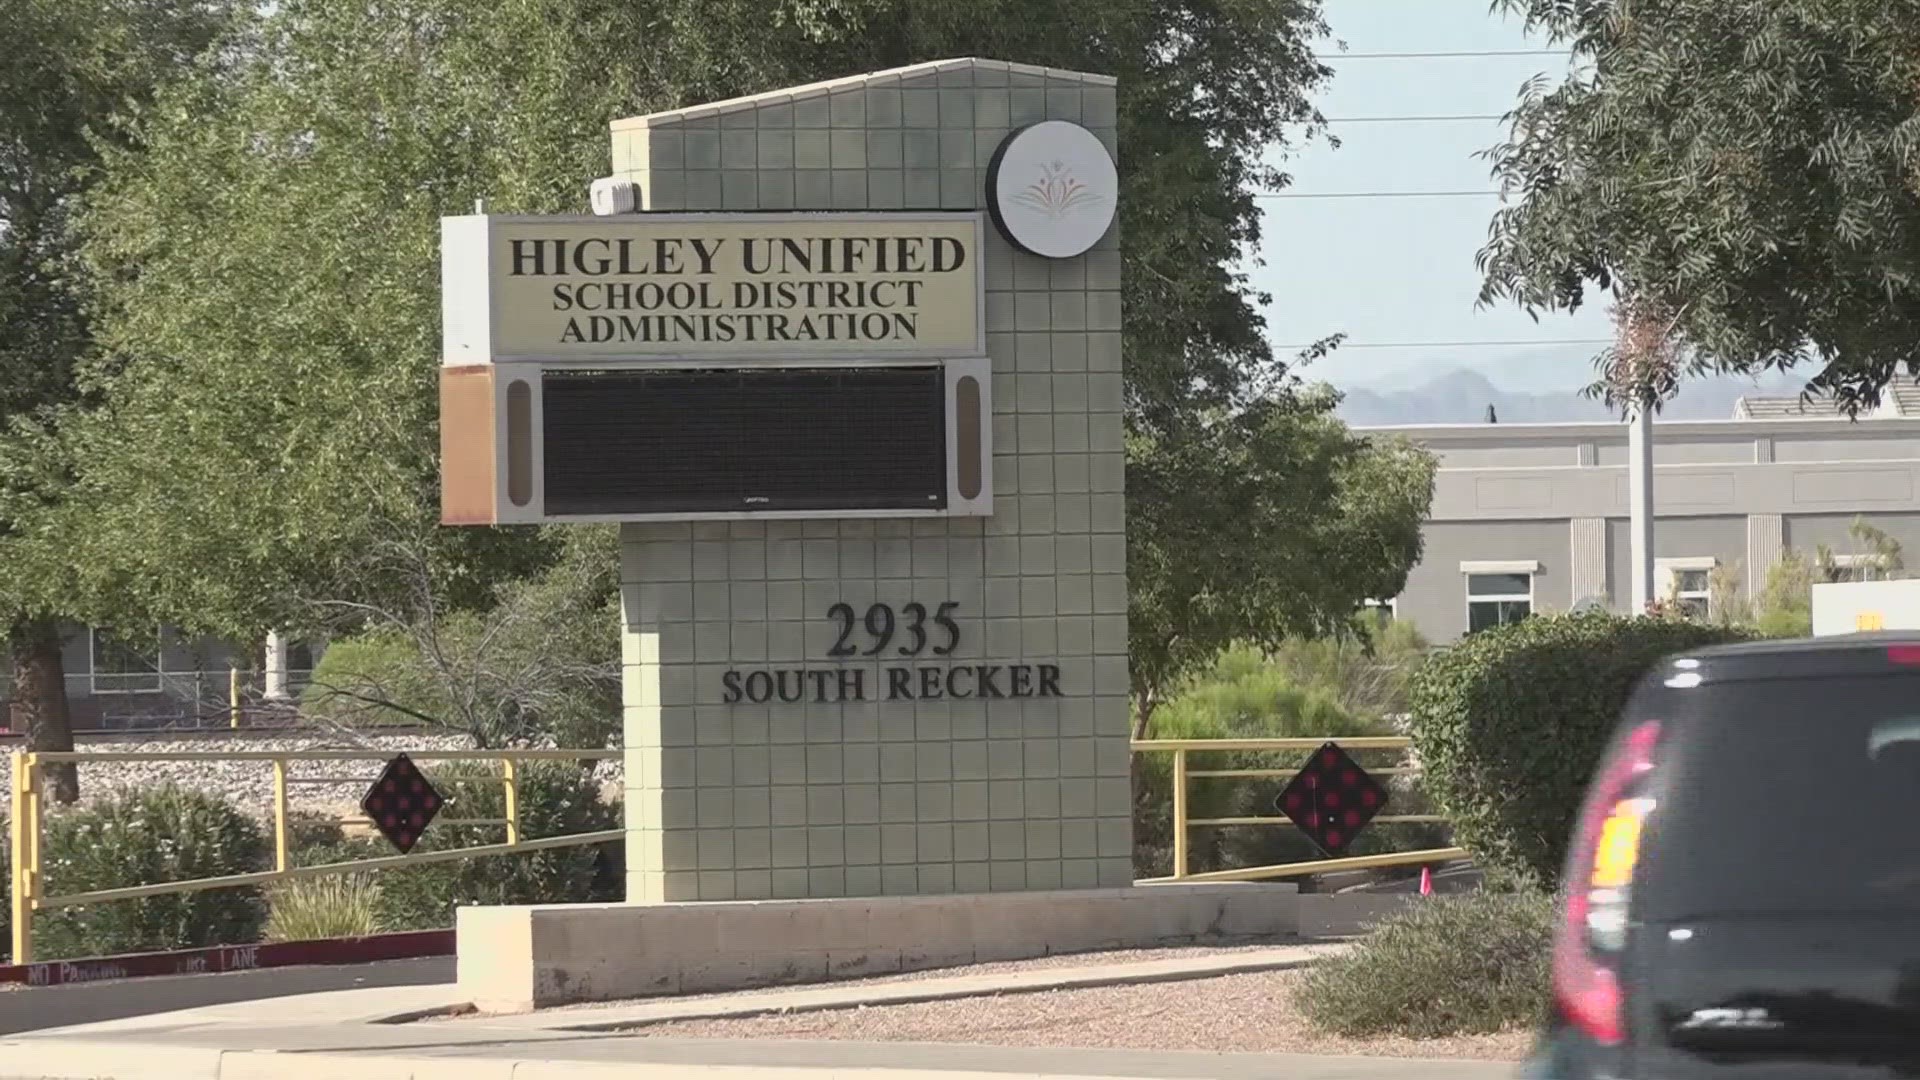 A Gilbert school district has been discussing possible changes to its dress code, making it less strict. But the proposed changes have some parents concerned.